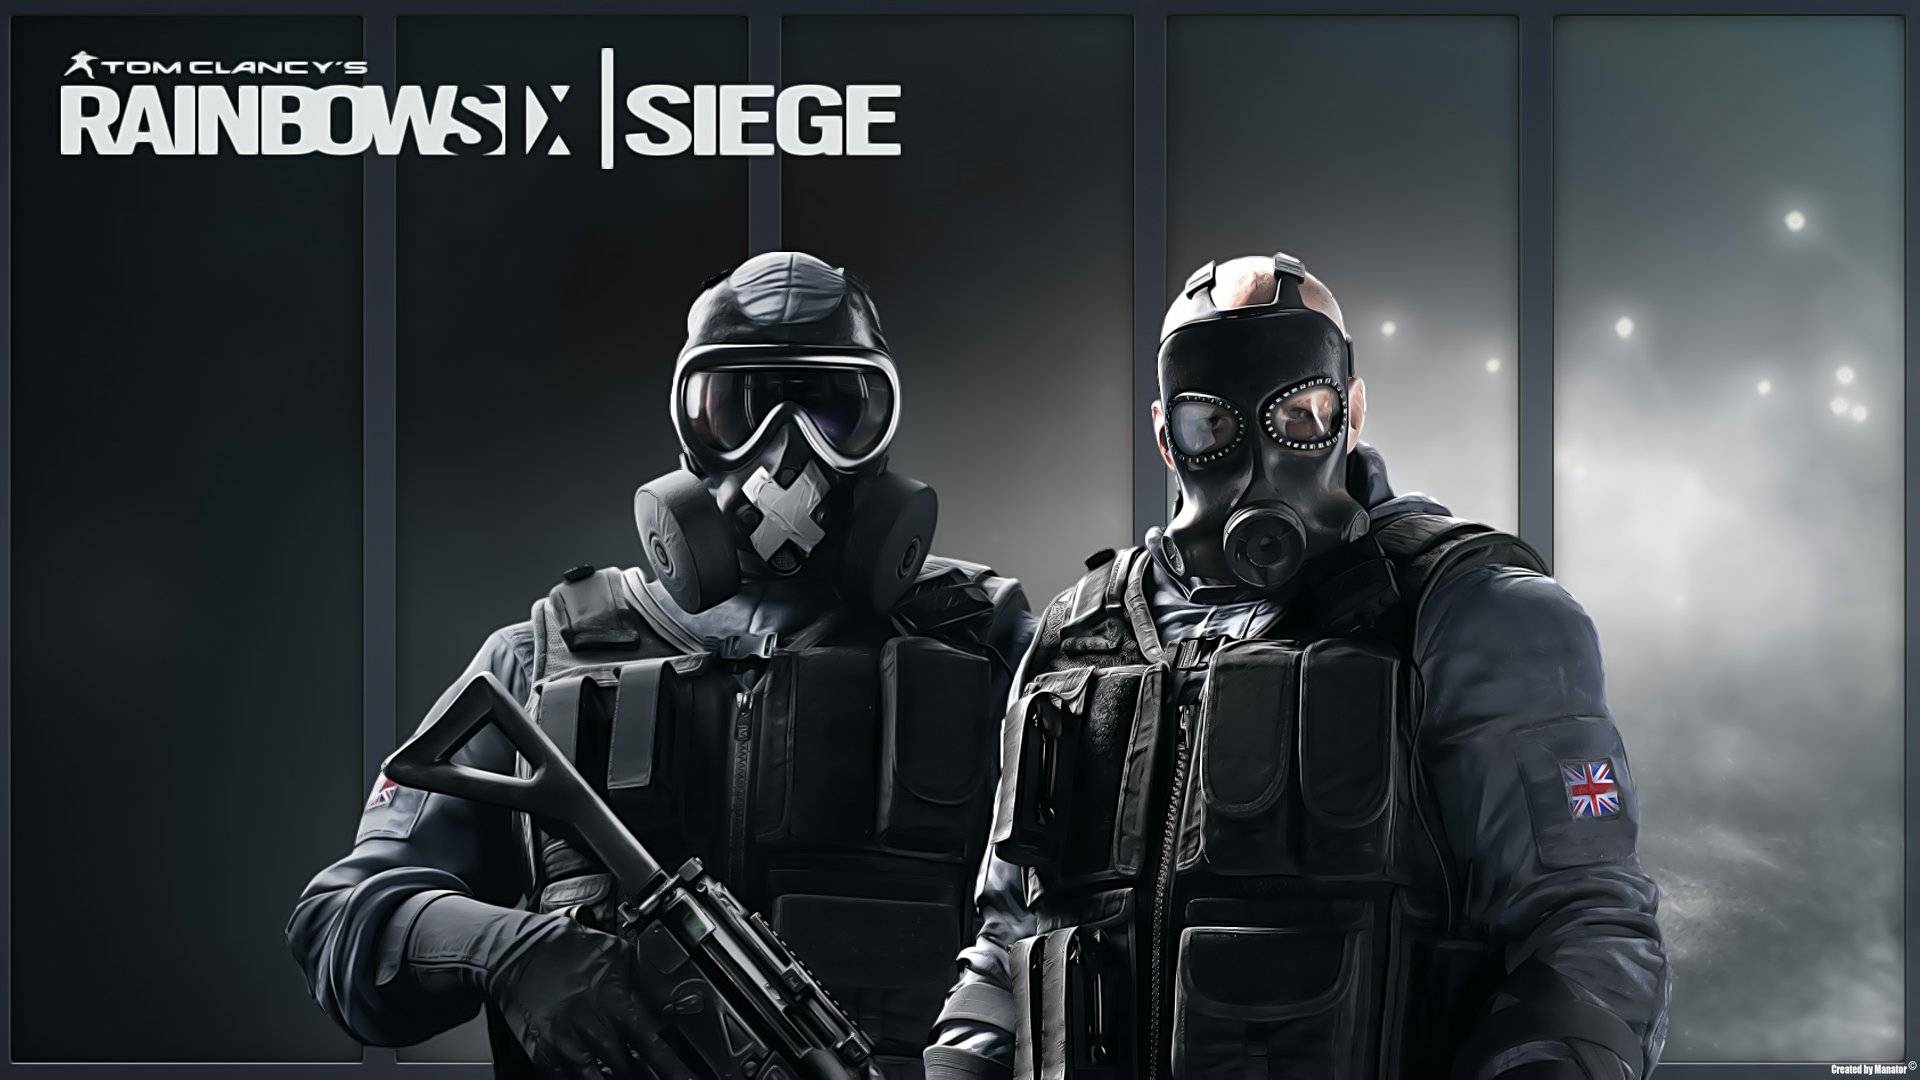 Rainbow 6 Siege Going Strong in 2022, Reaching Almost 90 Million Players